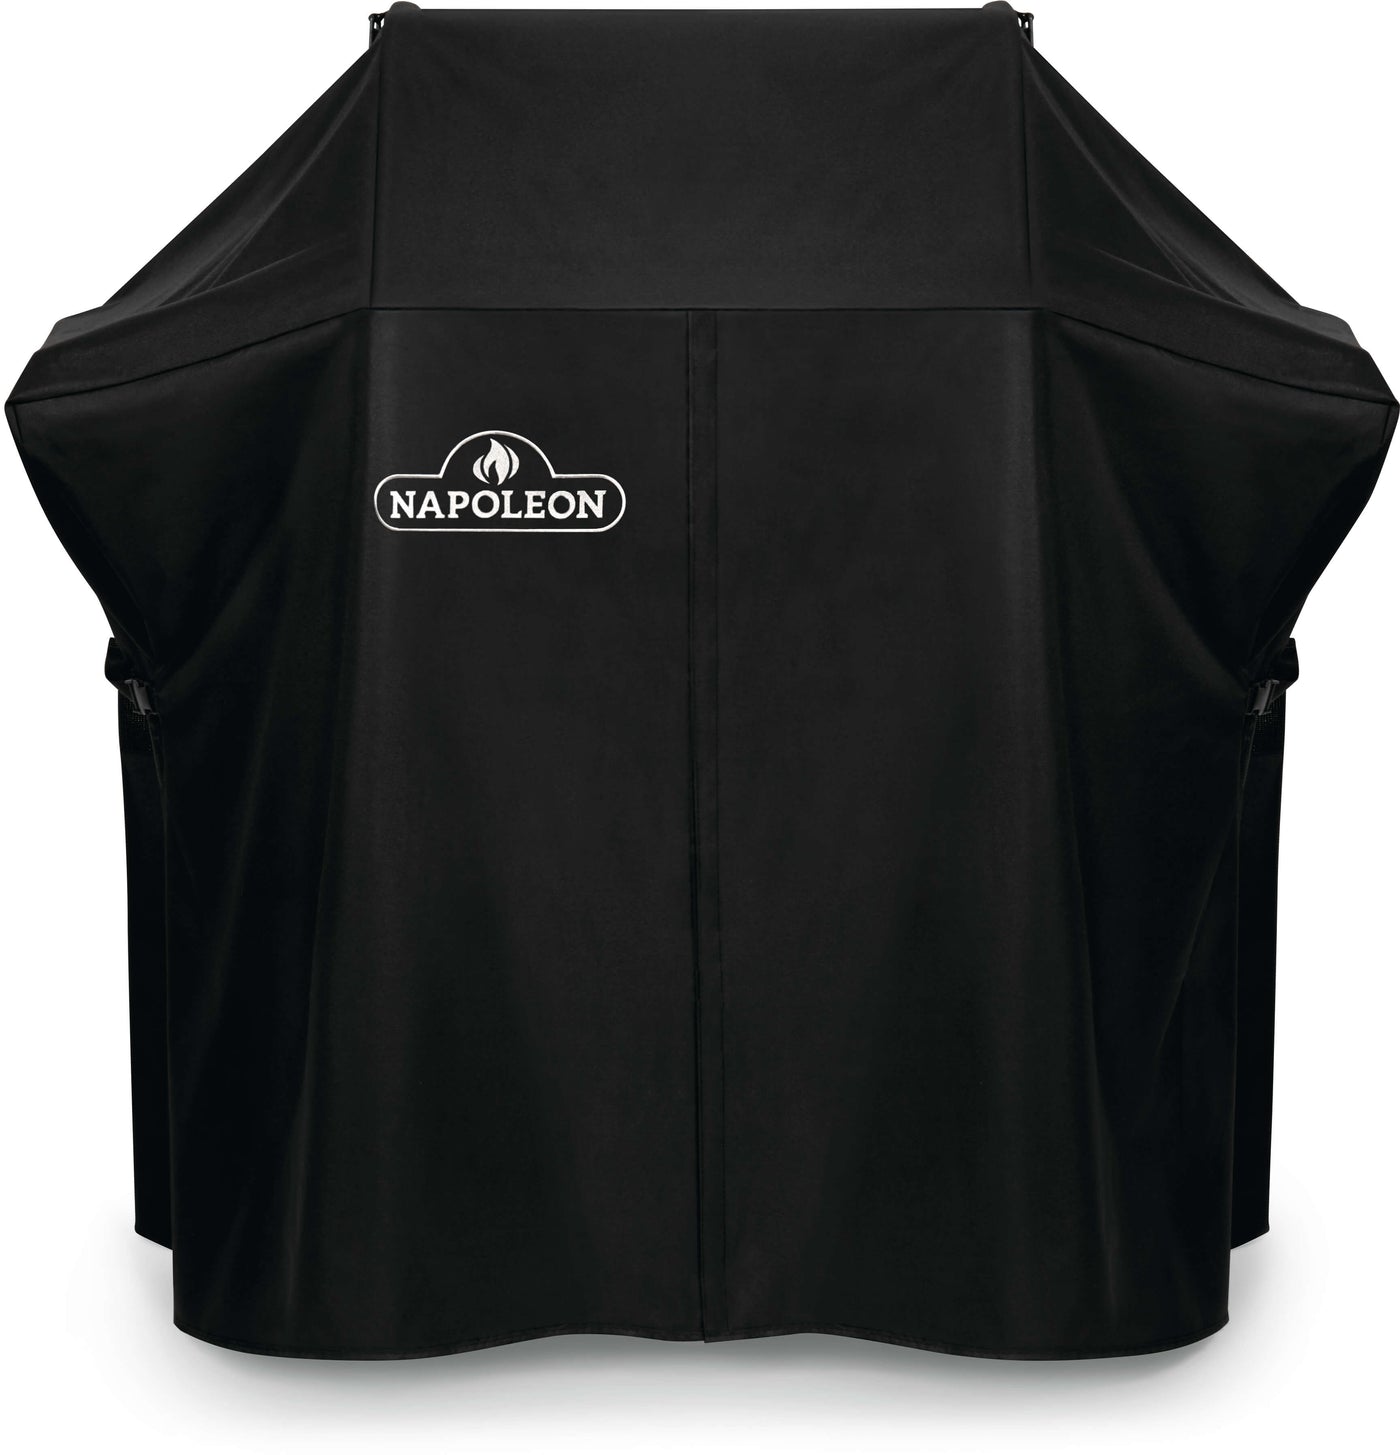 NAPOLEON BBQ COVER FOR ROGUE 365 SERIES - 61365